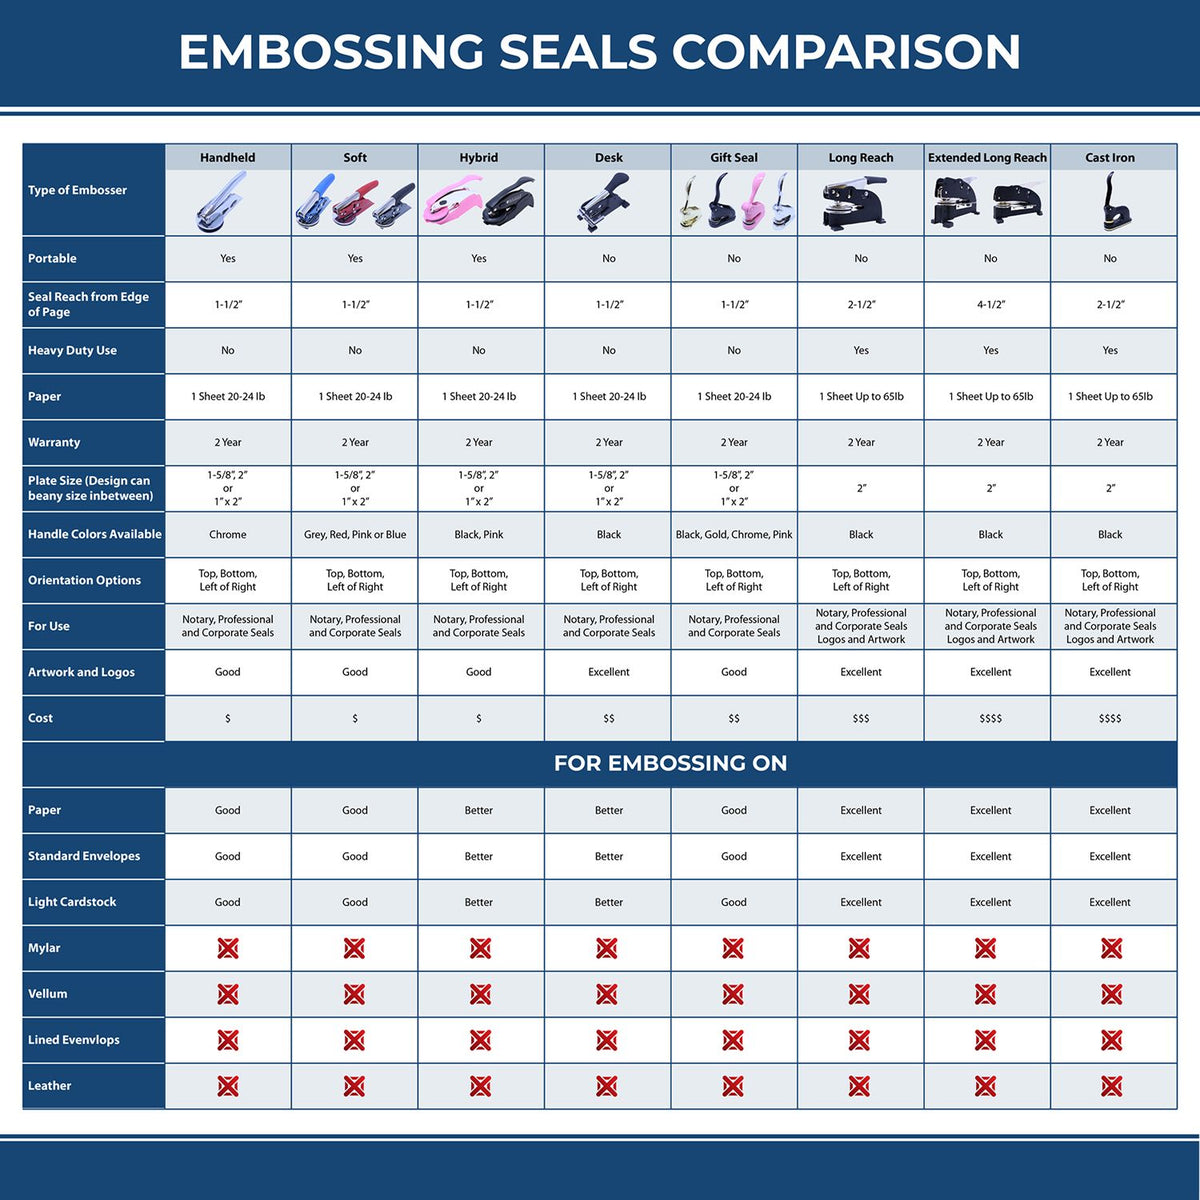 A comparison chart for the different types of mount models available for the Tennessee Engineer Desk Seal.